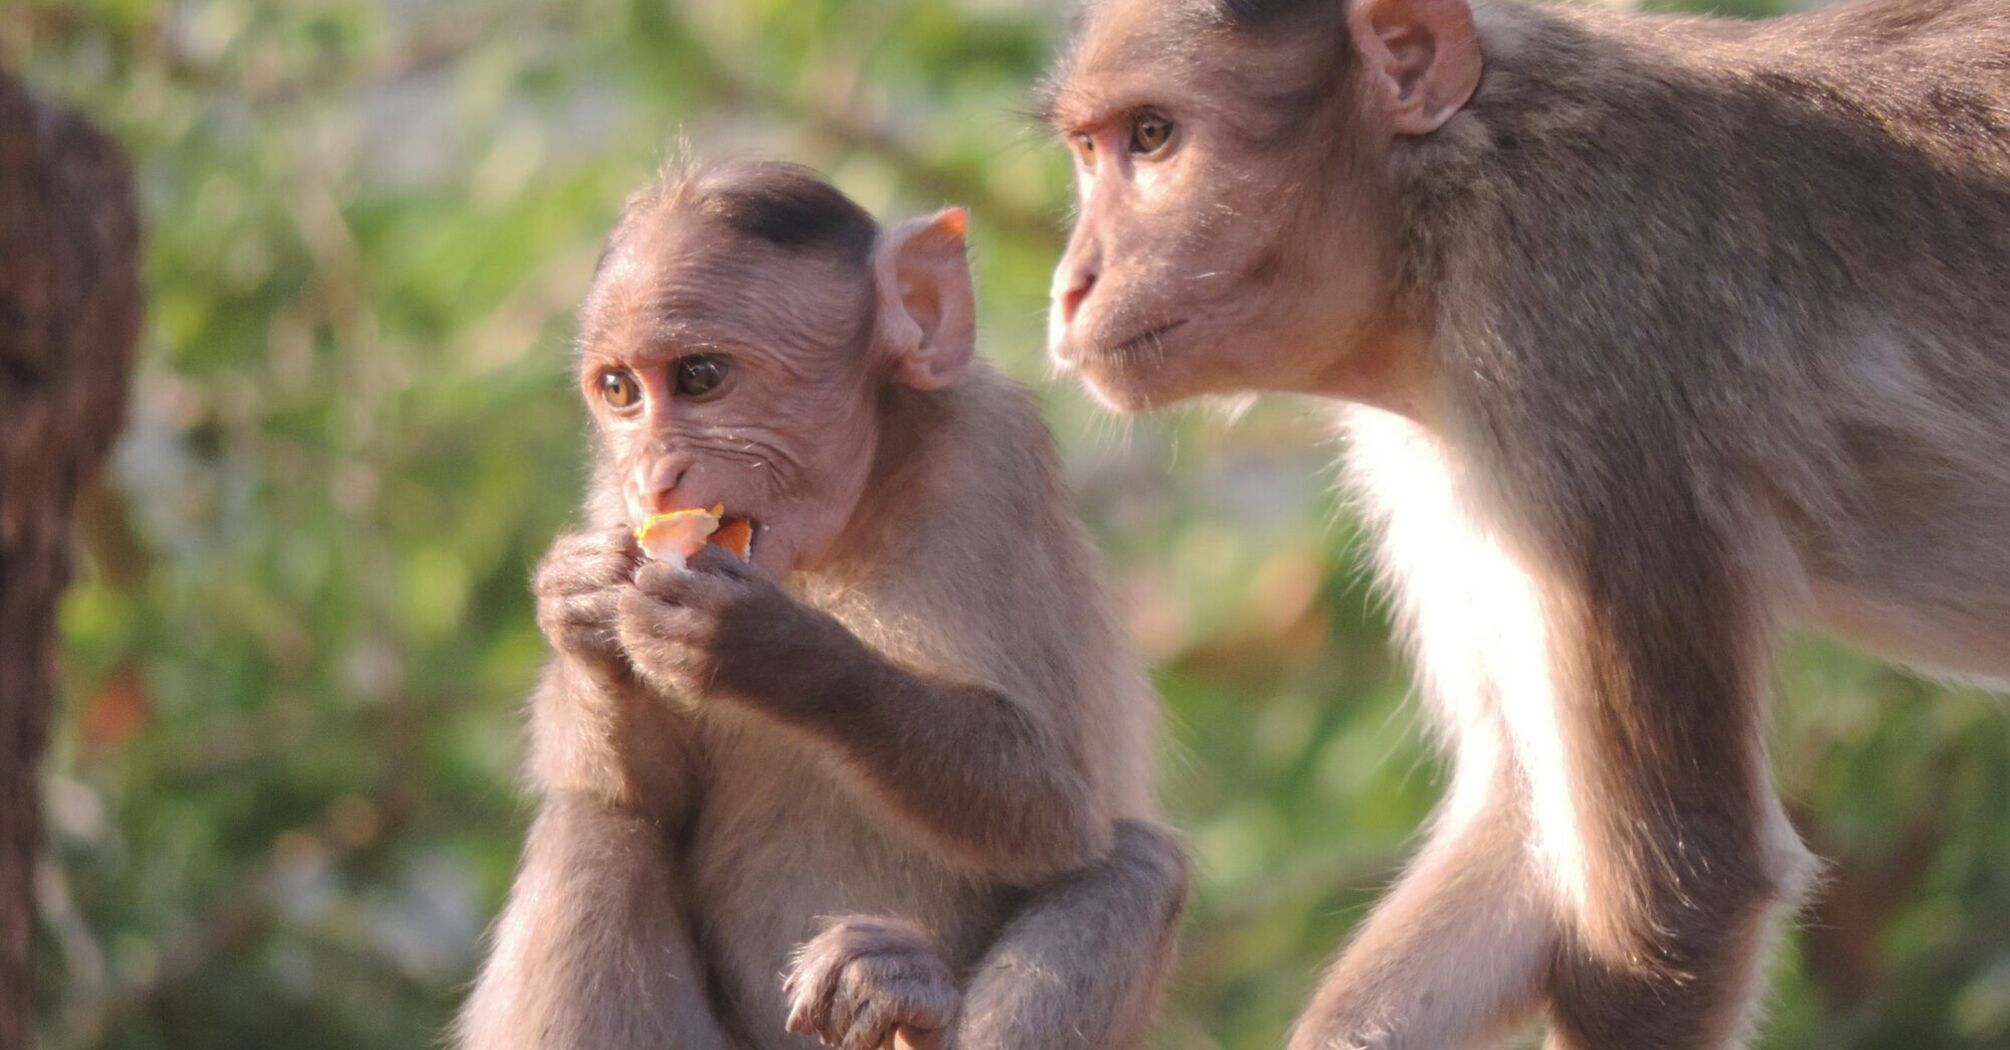 Two monkeys on a ledge, one eating, in natural light